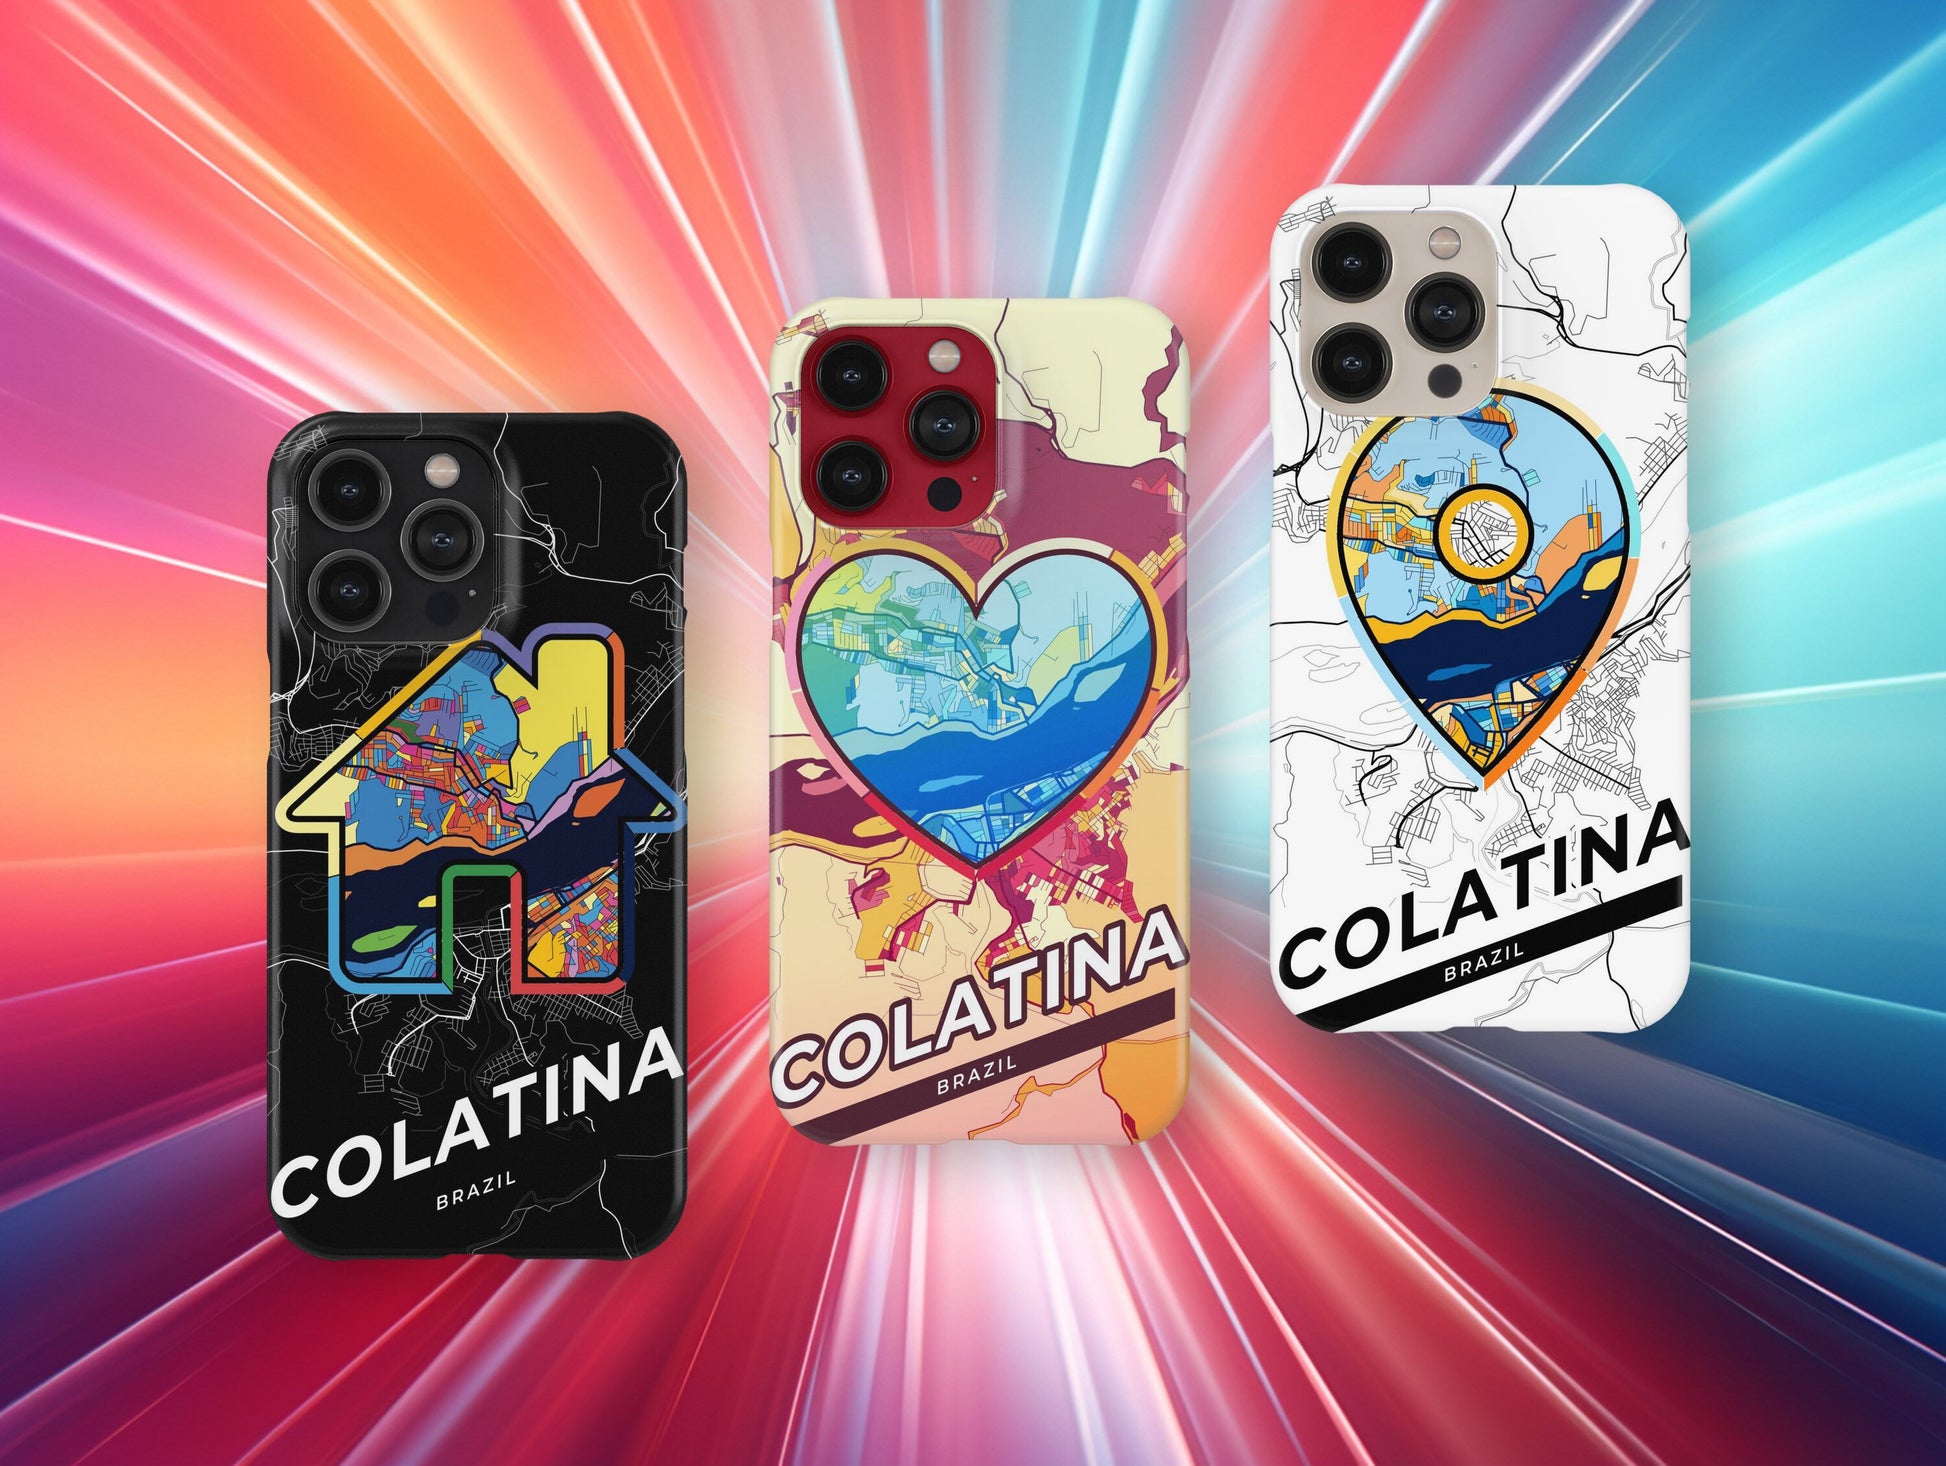 Colatina Brazil slim phone case with colorful icon. Birthday, wedding or housewarming gift. Couple match cases.